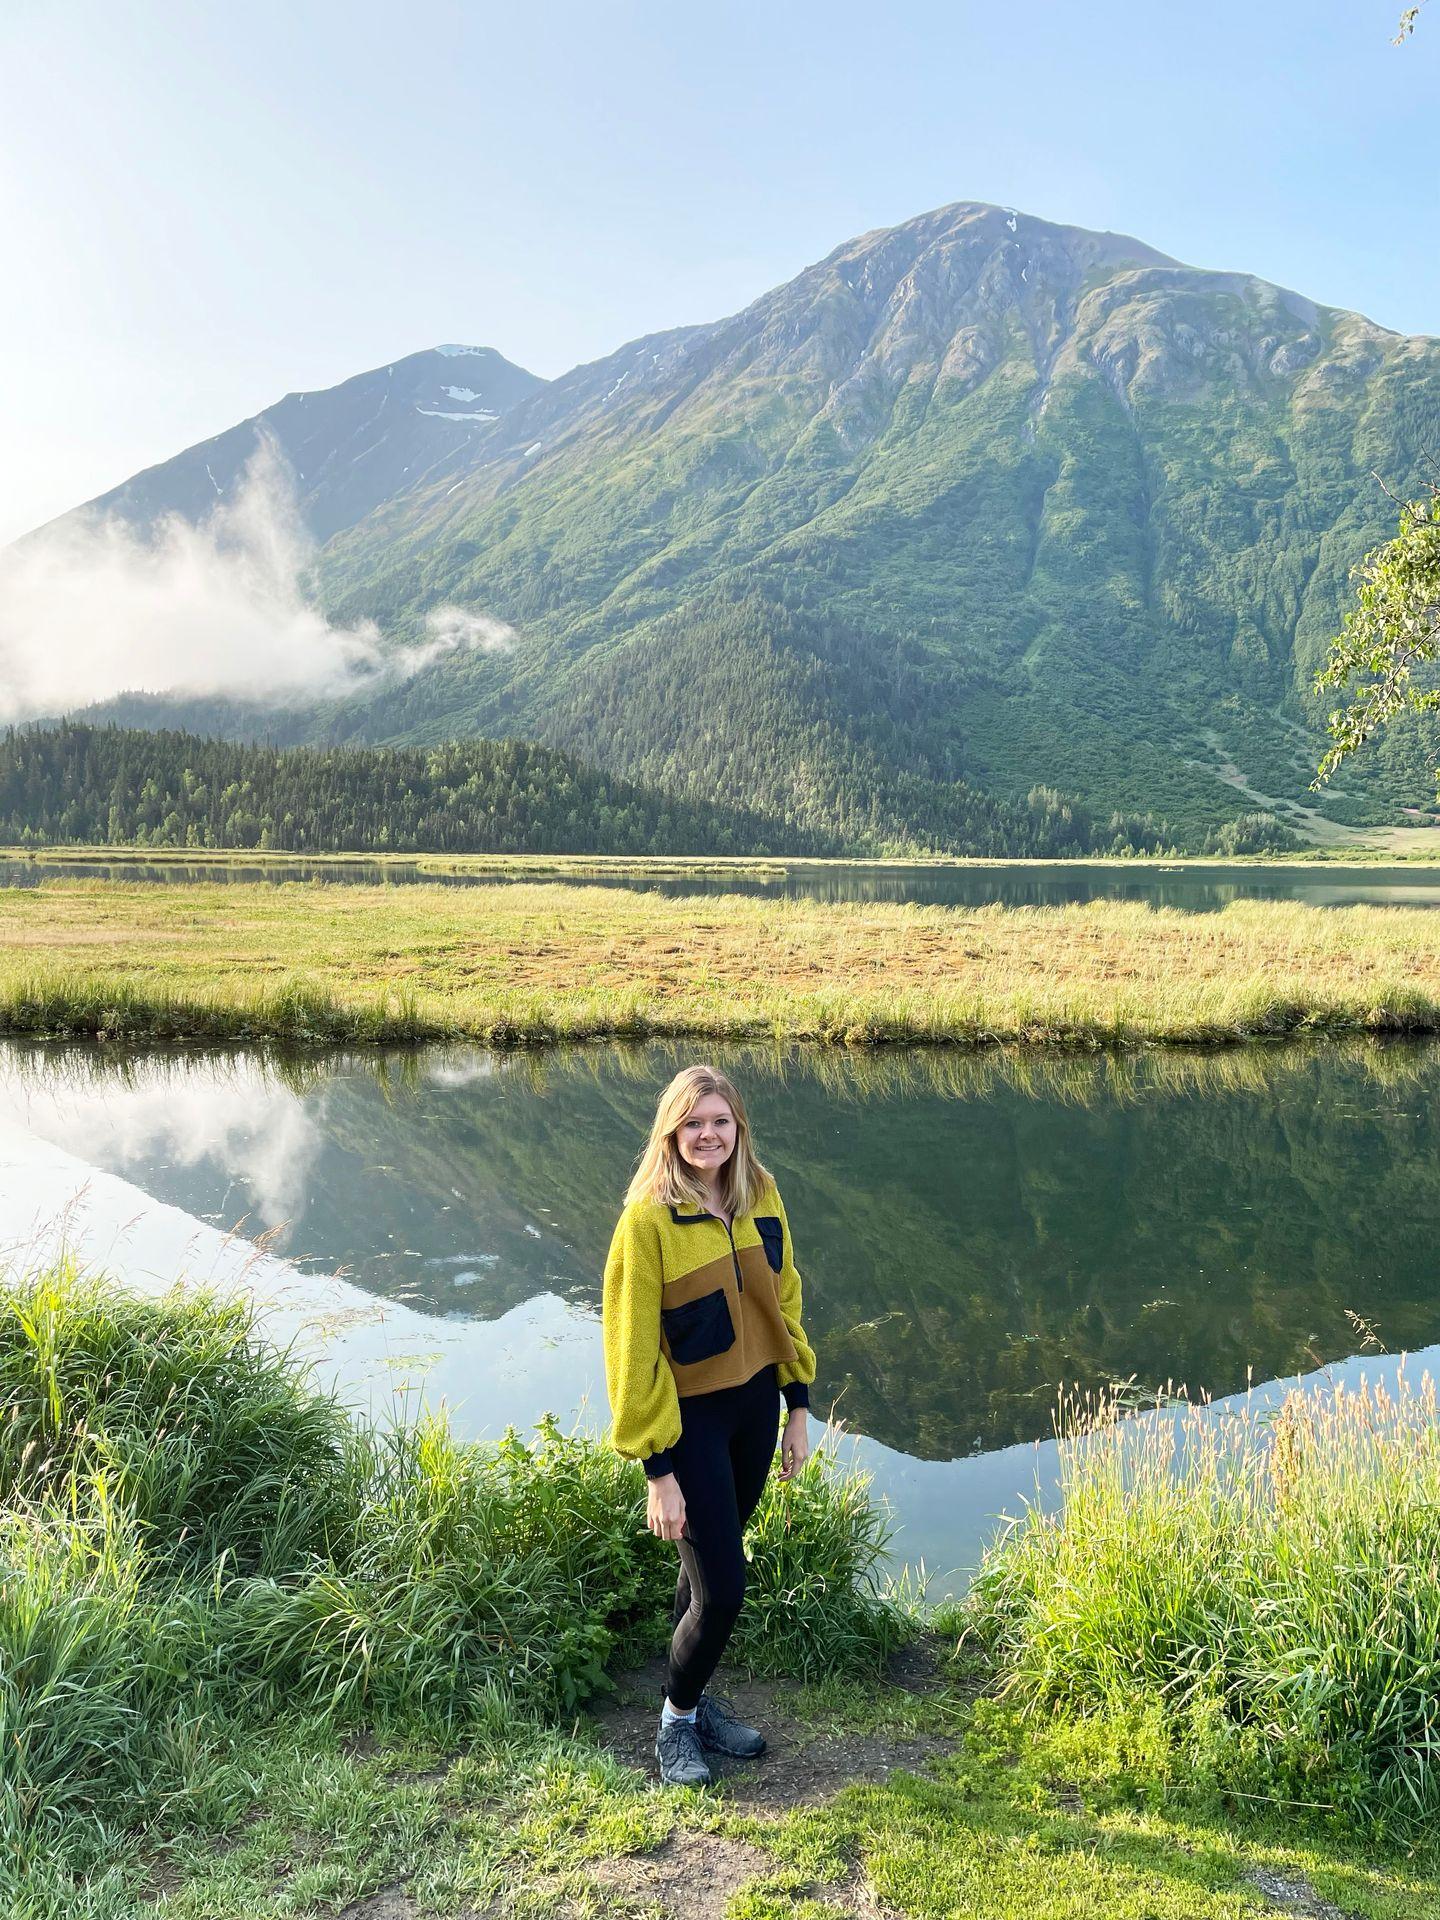 Lydia standing in front of Tern Lake, which has a beautiful mountain reflection on the water.